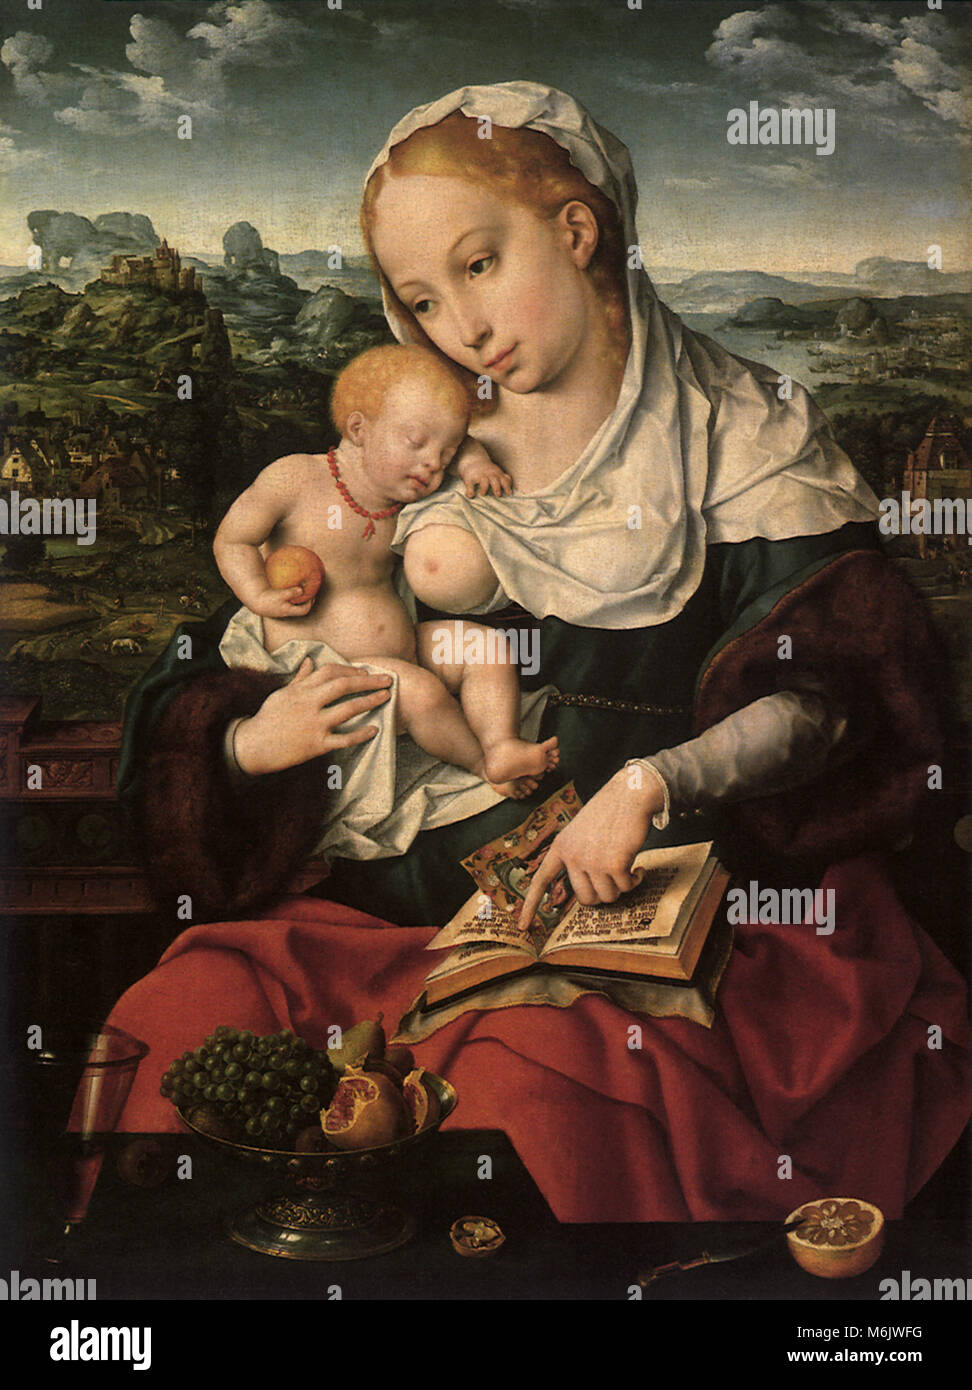 The Virgin and Child, Cleve, Joos van, 1520. Stock Photo